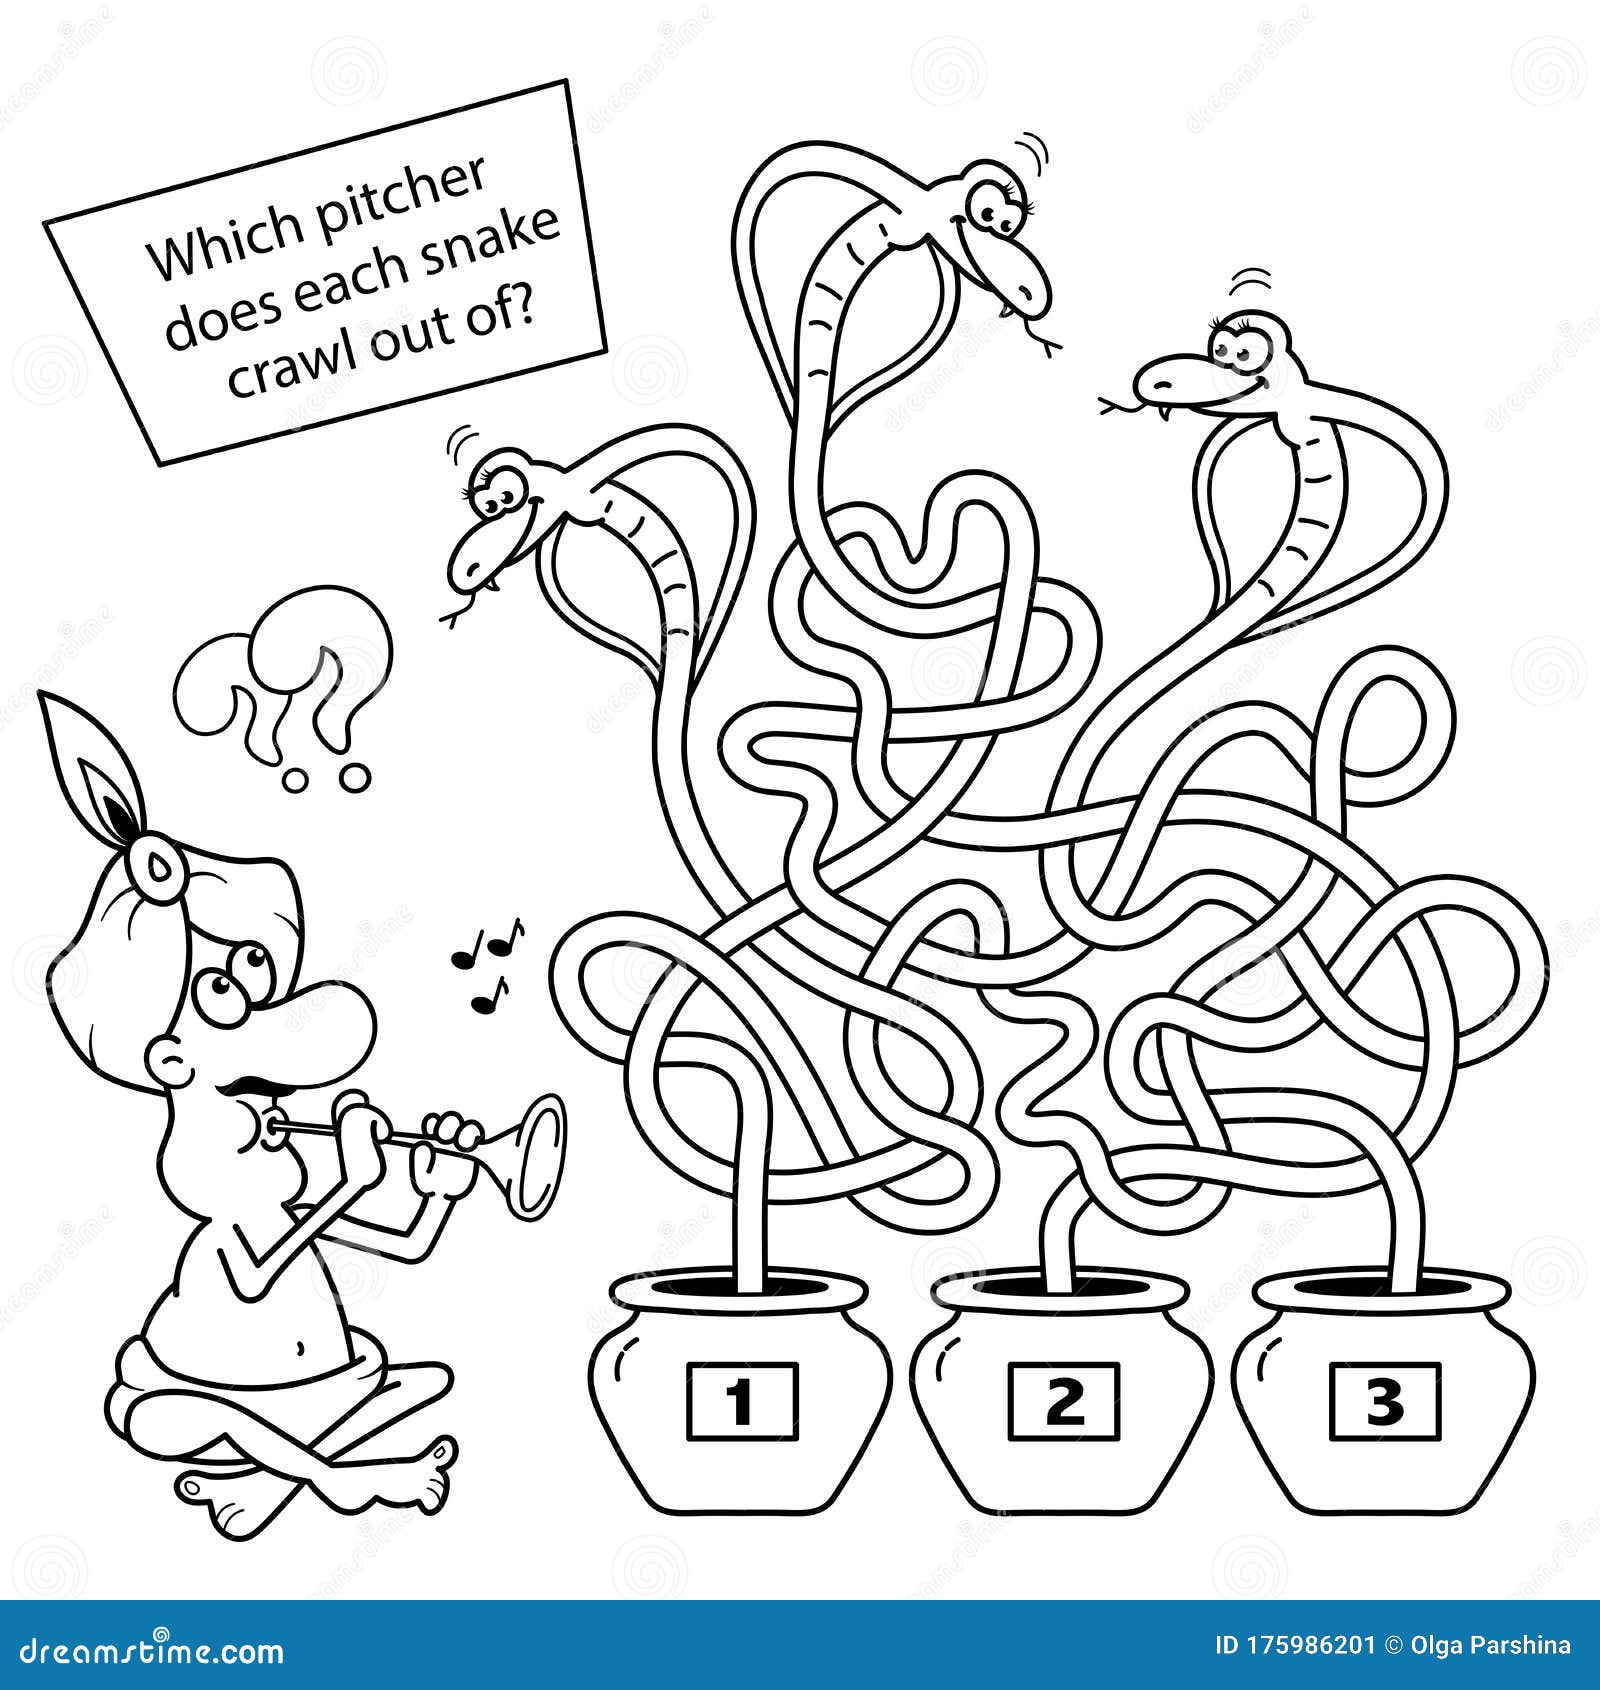 maze or labyrinth game for preschool children. puzzle. tangled road.  coloring page outline of cartoon fakir or snake charmer with